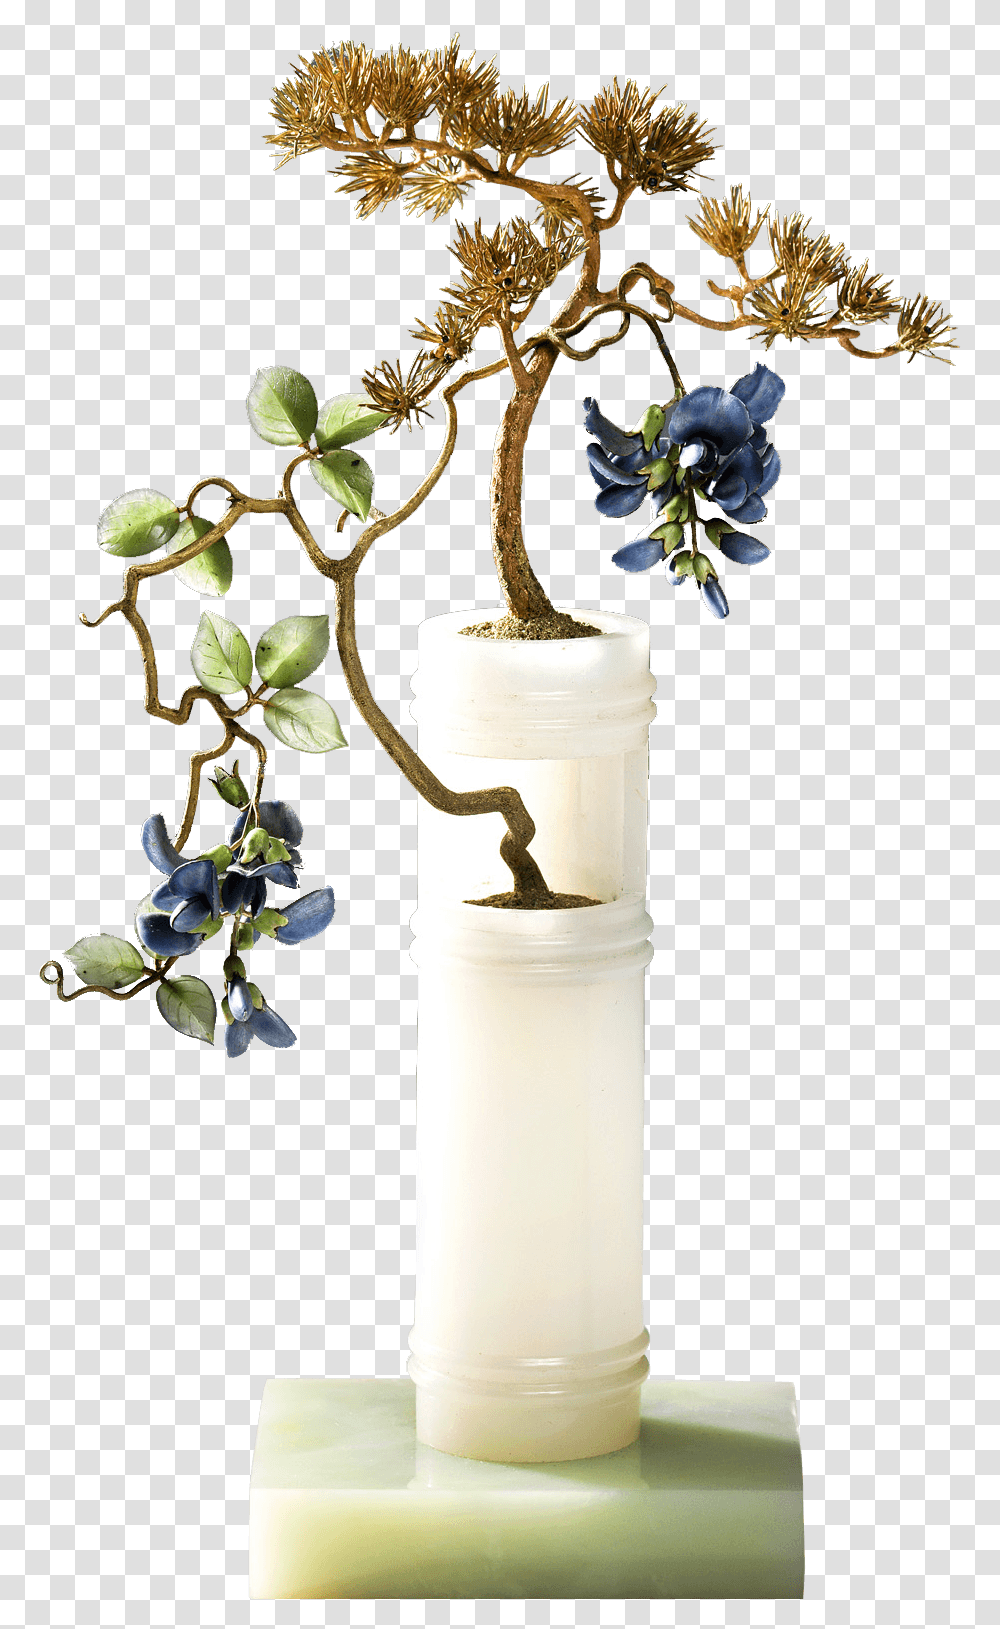 Pine Entwined With Wisteria By Peter Carl Faberg Cylinder, Plant, Flower, Jar, Vase Transparent Png